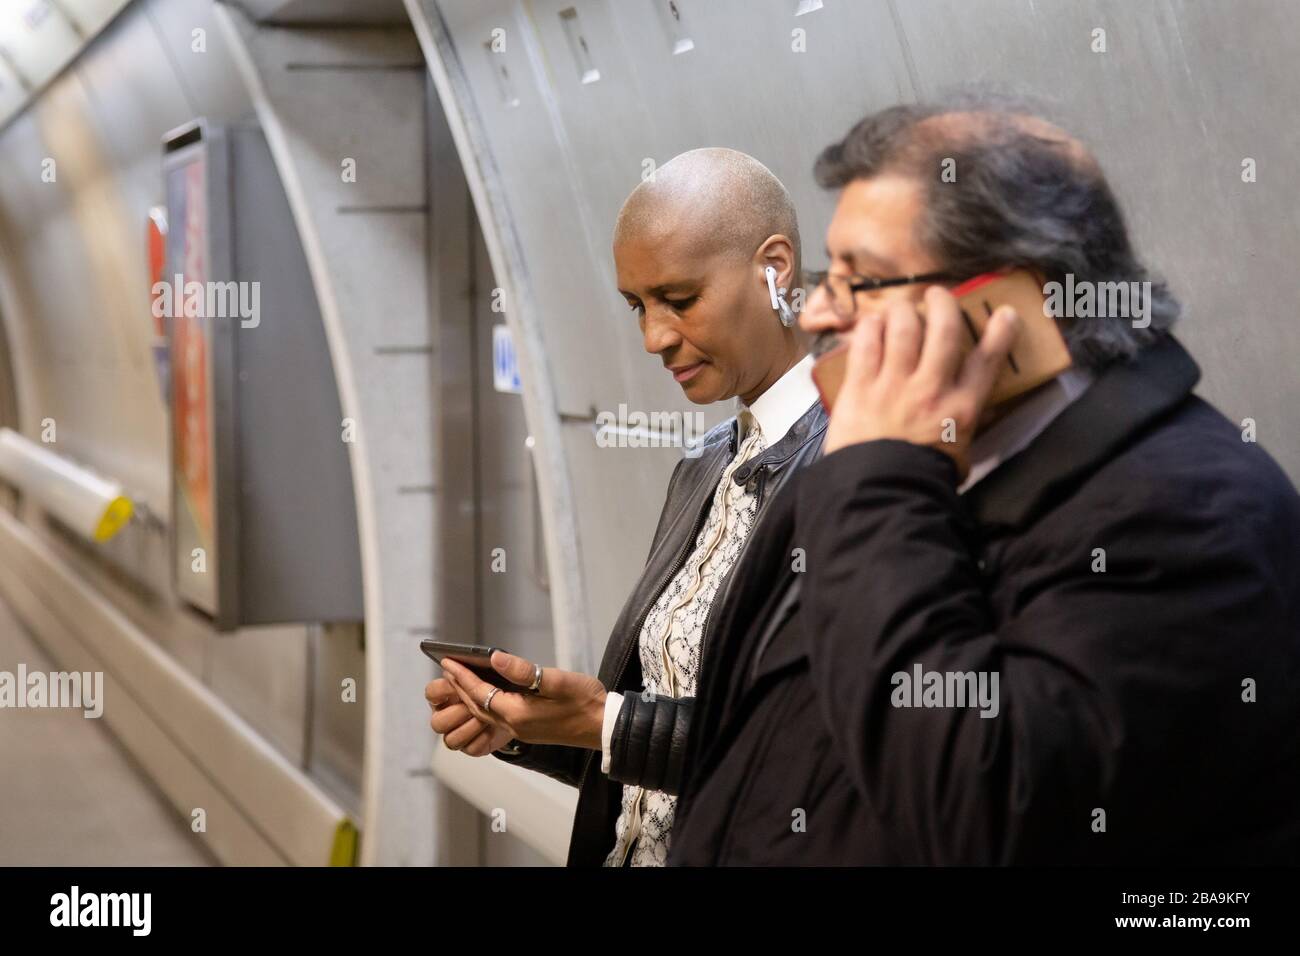 A woman uses her smartphone on the Underground while a man makes a phone call, part of the London Underground subway system Stock Photo